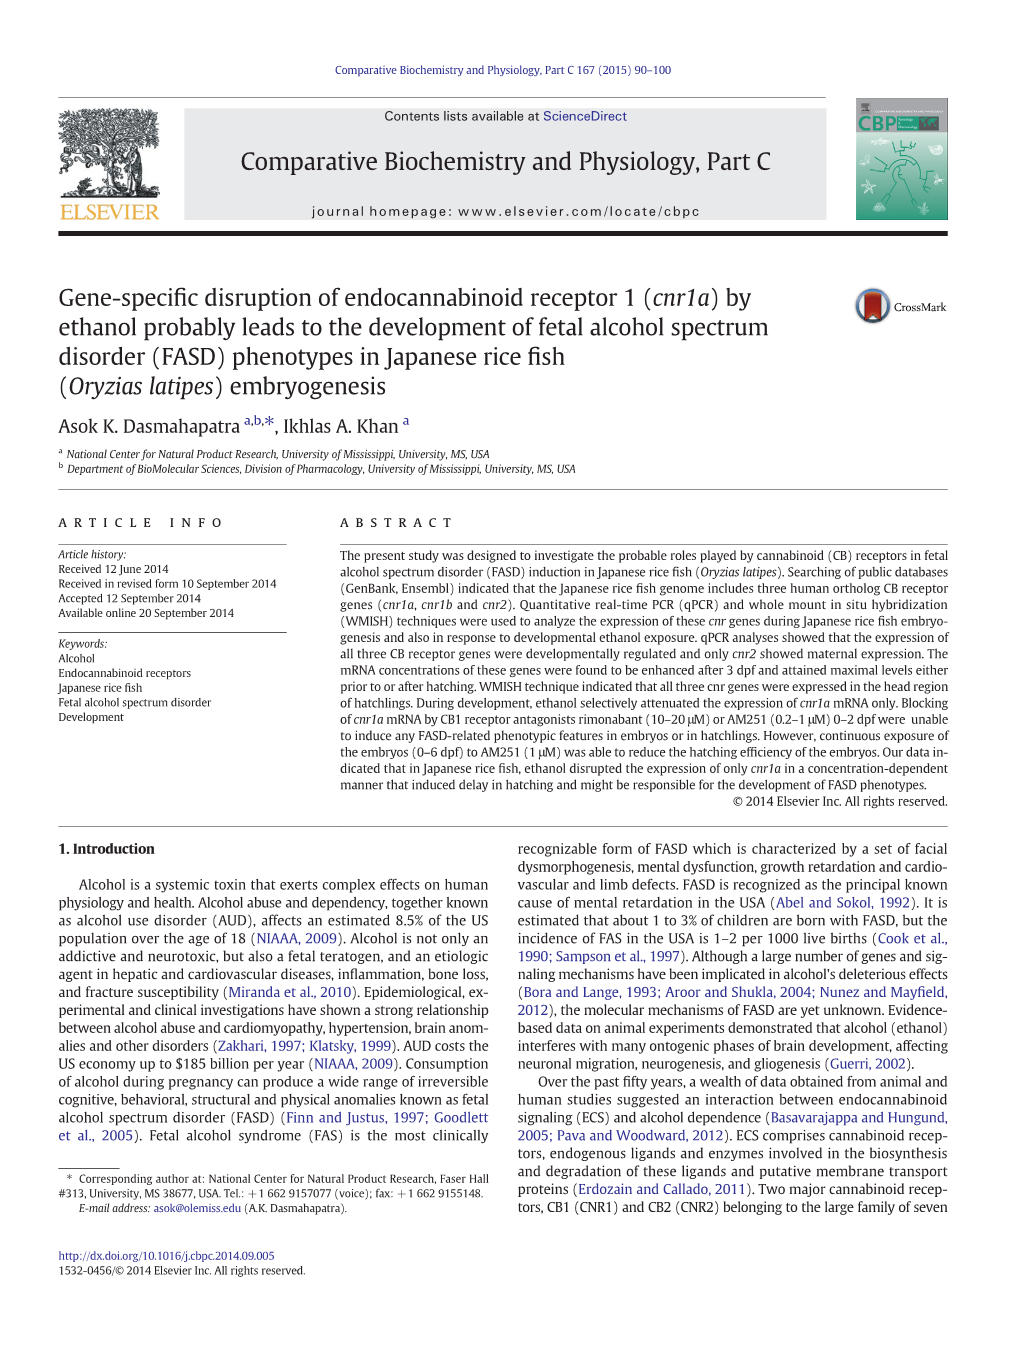 By Ethanol Probably Leads to the Development of Fetal Alcohol Spectrum Disorder (FASD) Phenotypes in Japanese Rice ﬁsh (Oryzias Latipes) Embryogenesis